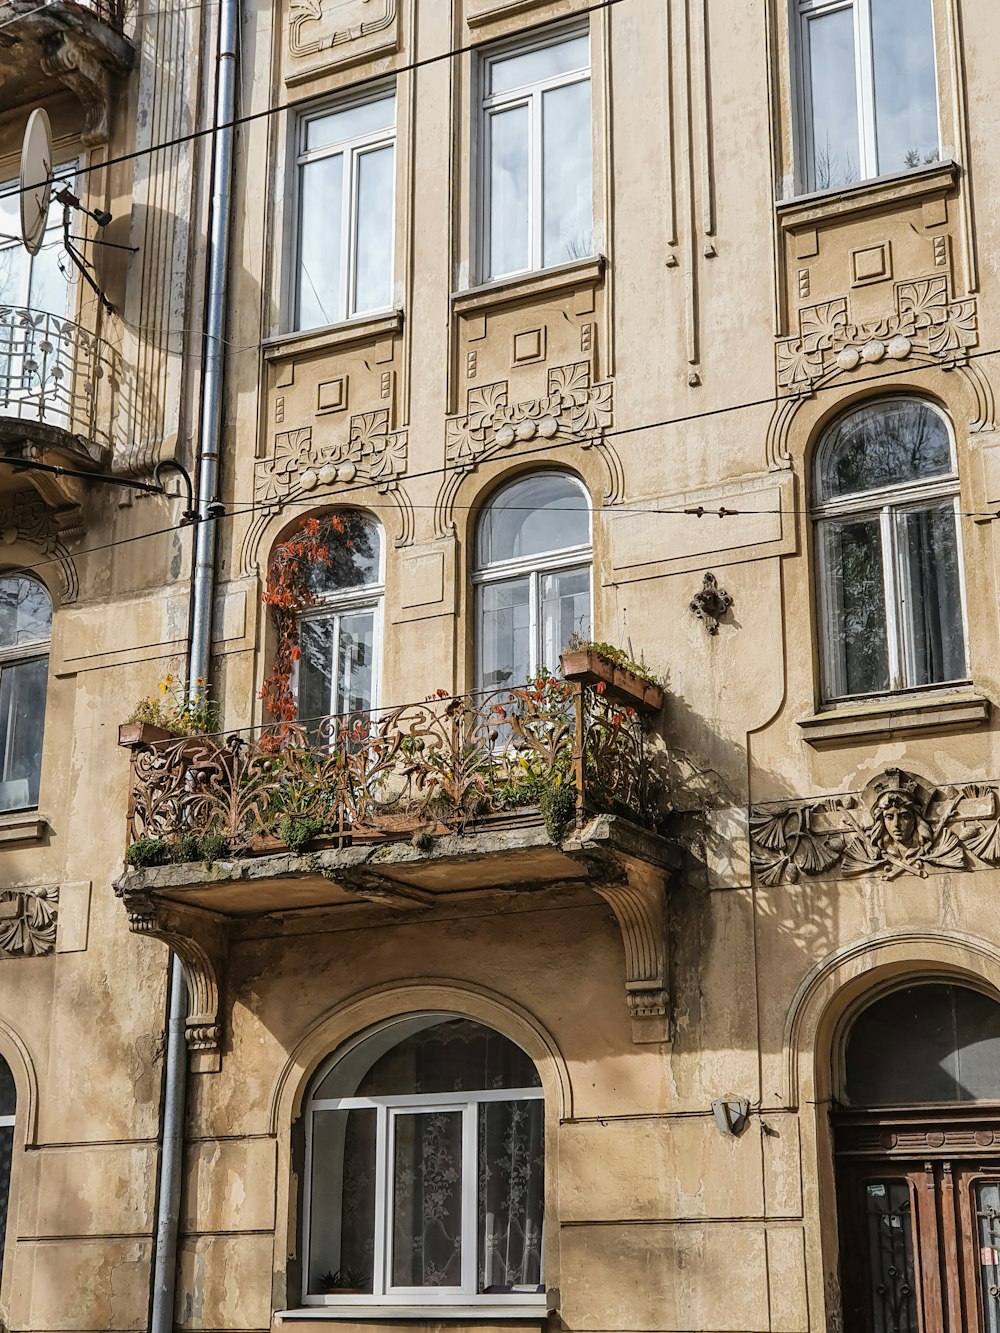 an old building with a balcony and flower boxes on the balconies